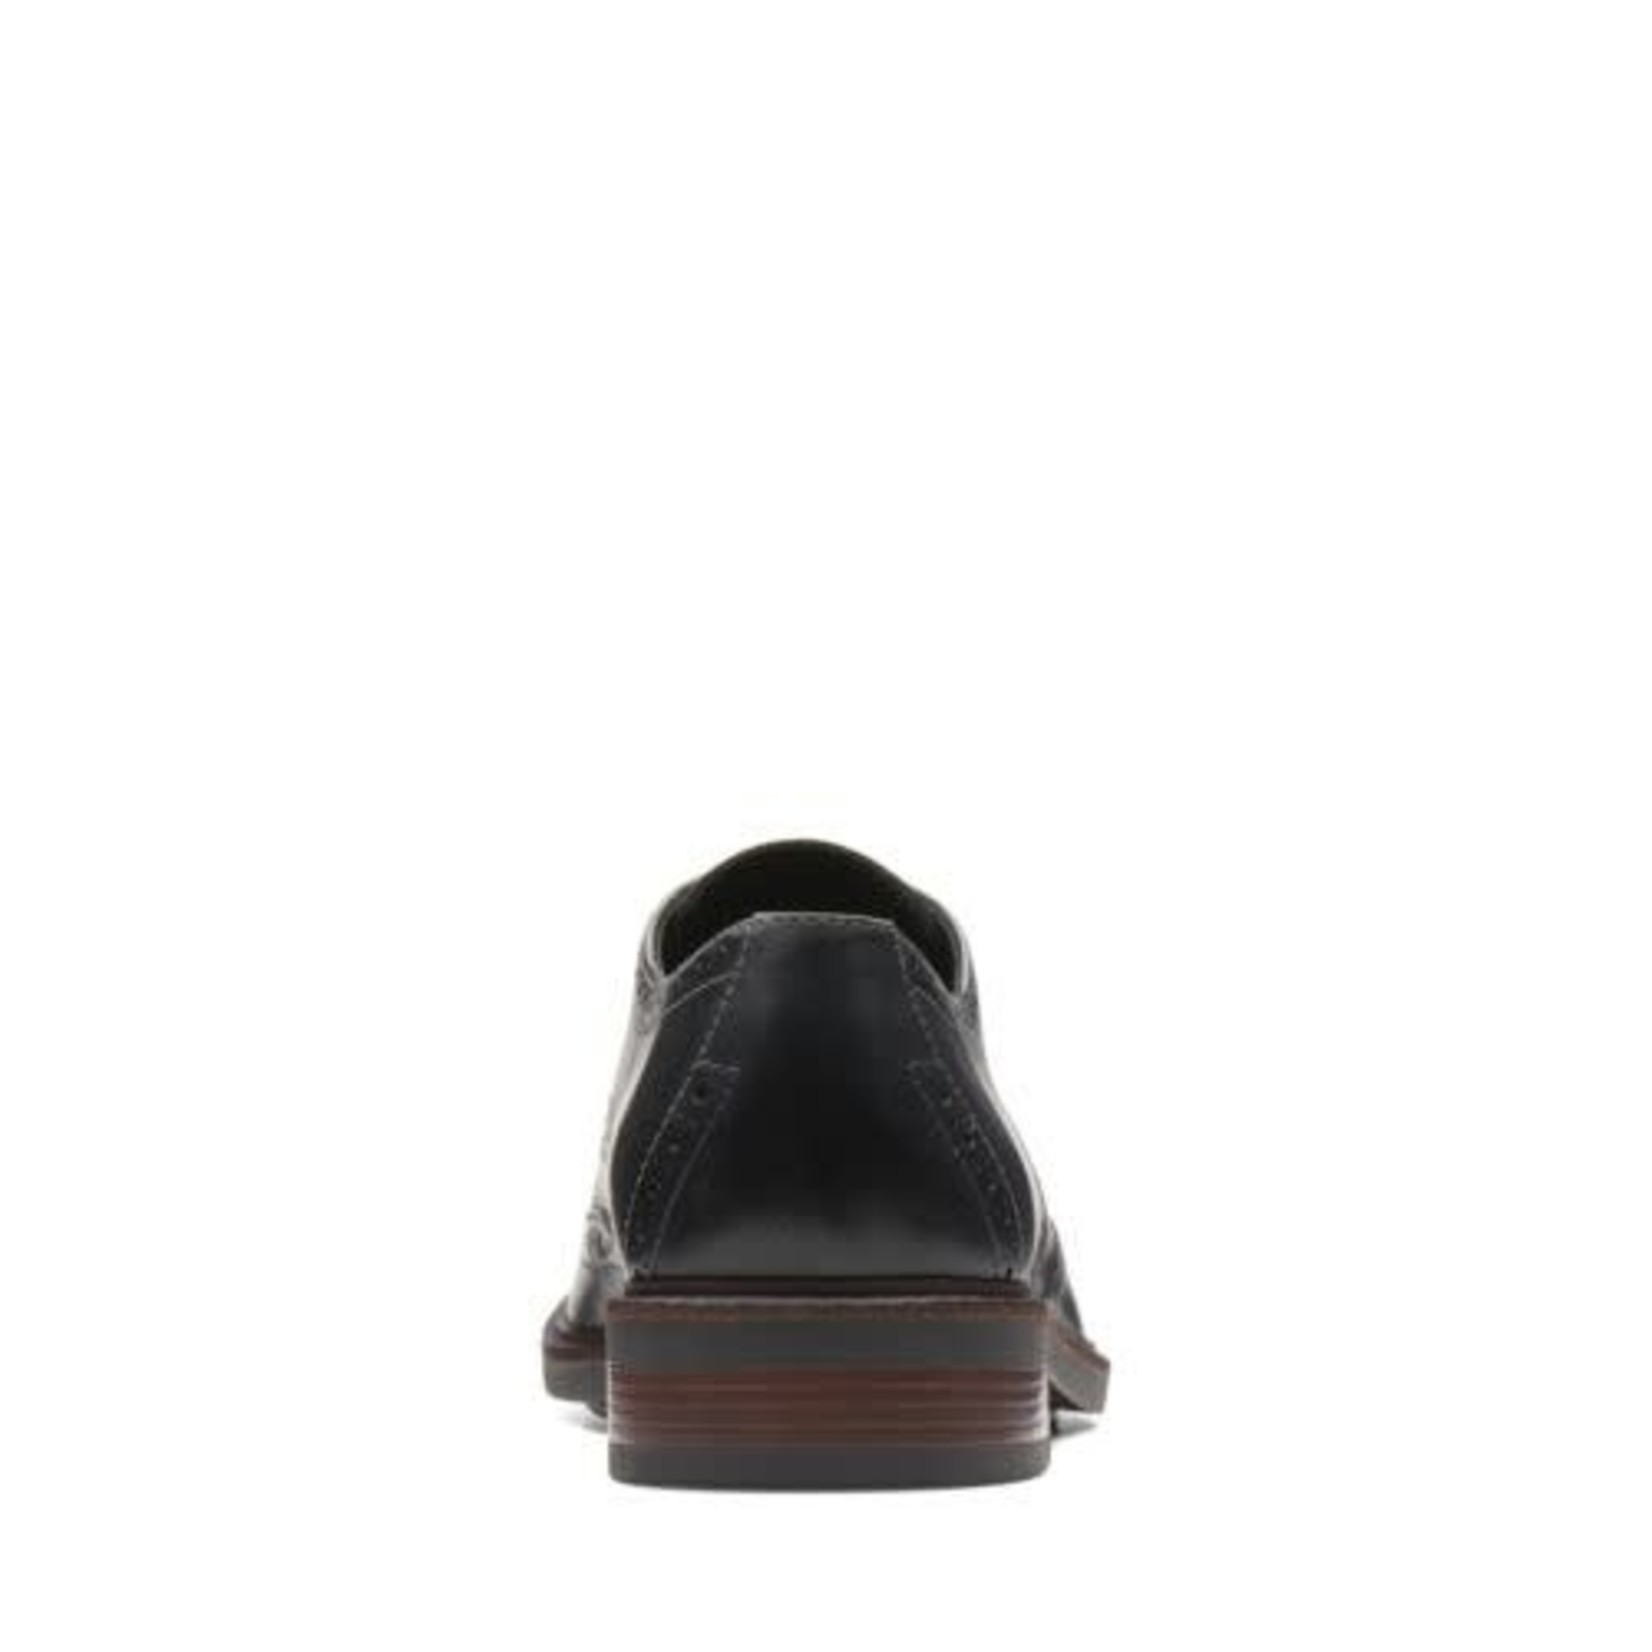 CLARKS CLARKS- MAXTON WING- BLACK LEATHER